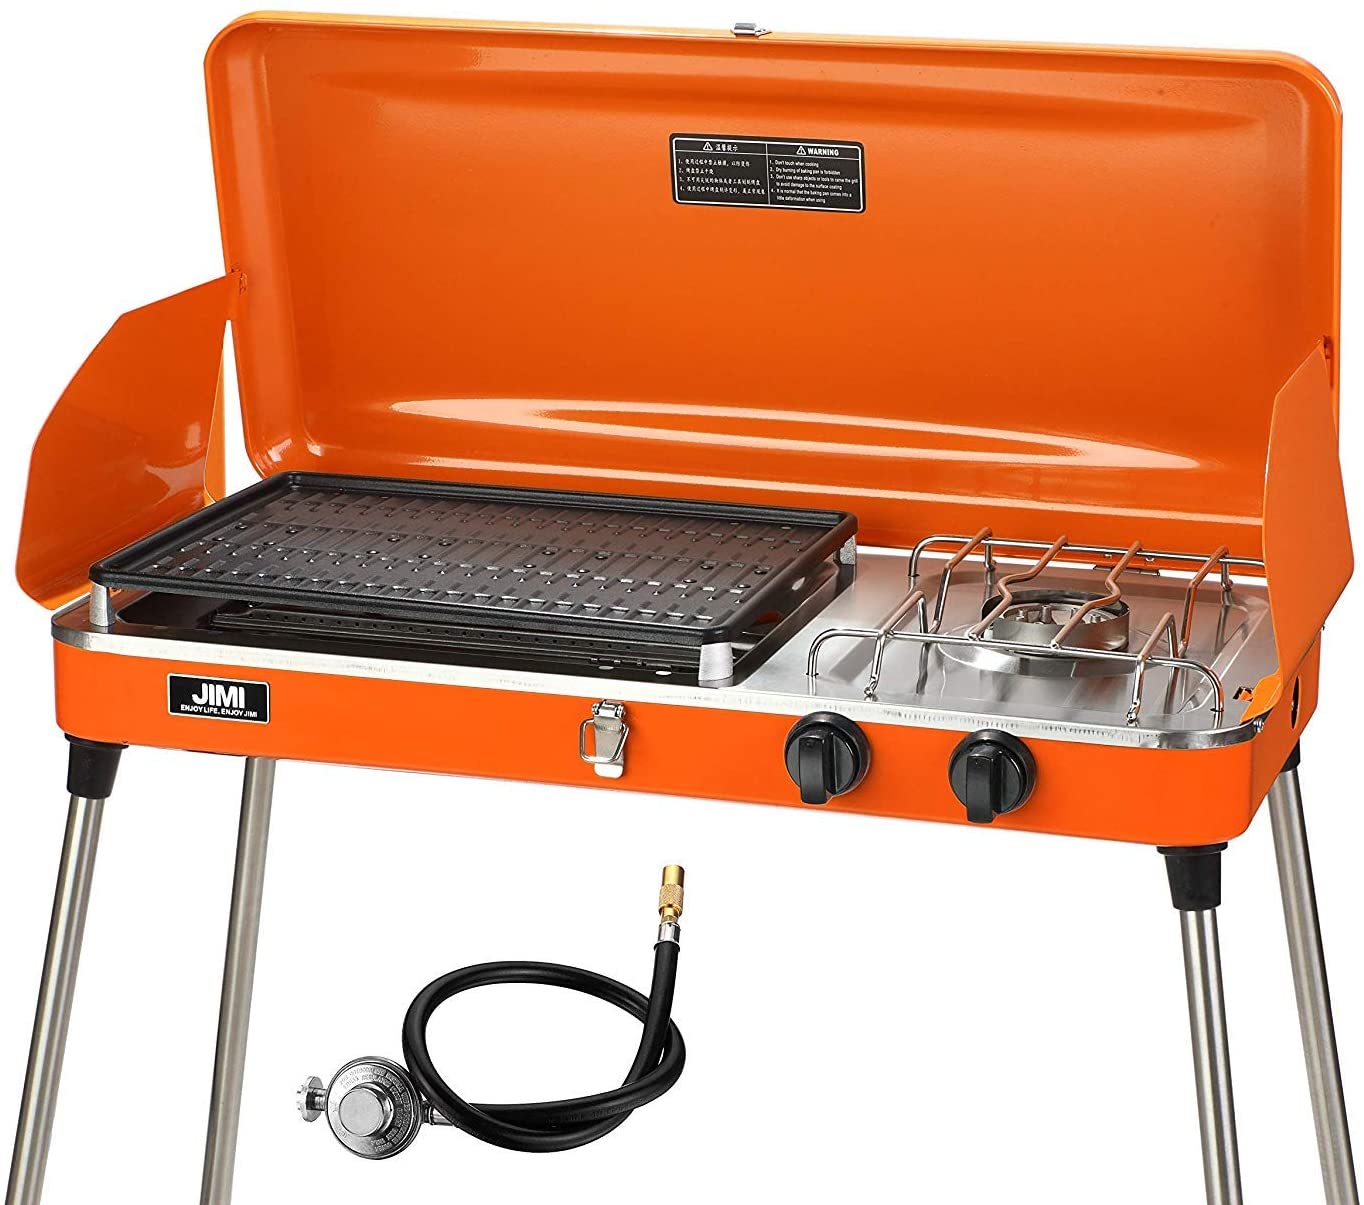 PUPZO Liquid Propane Grill2 Burner Grill Stove Portable Barbecue Grill Outdoor Cooking Camping Stove Stainless Steel 